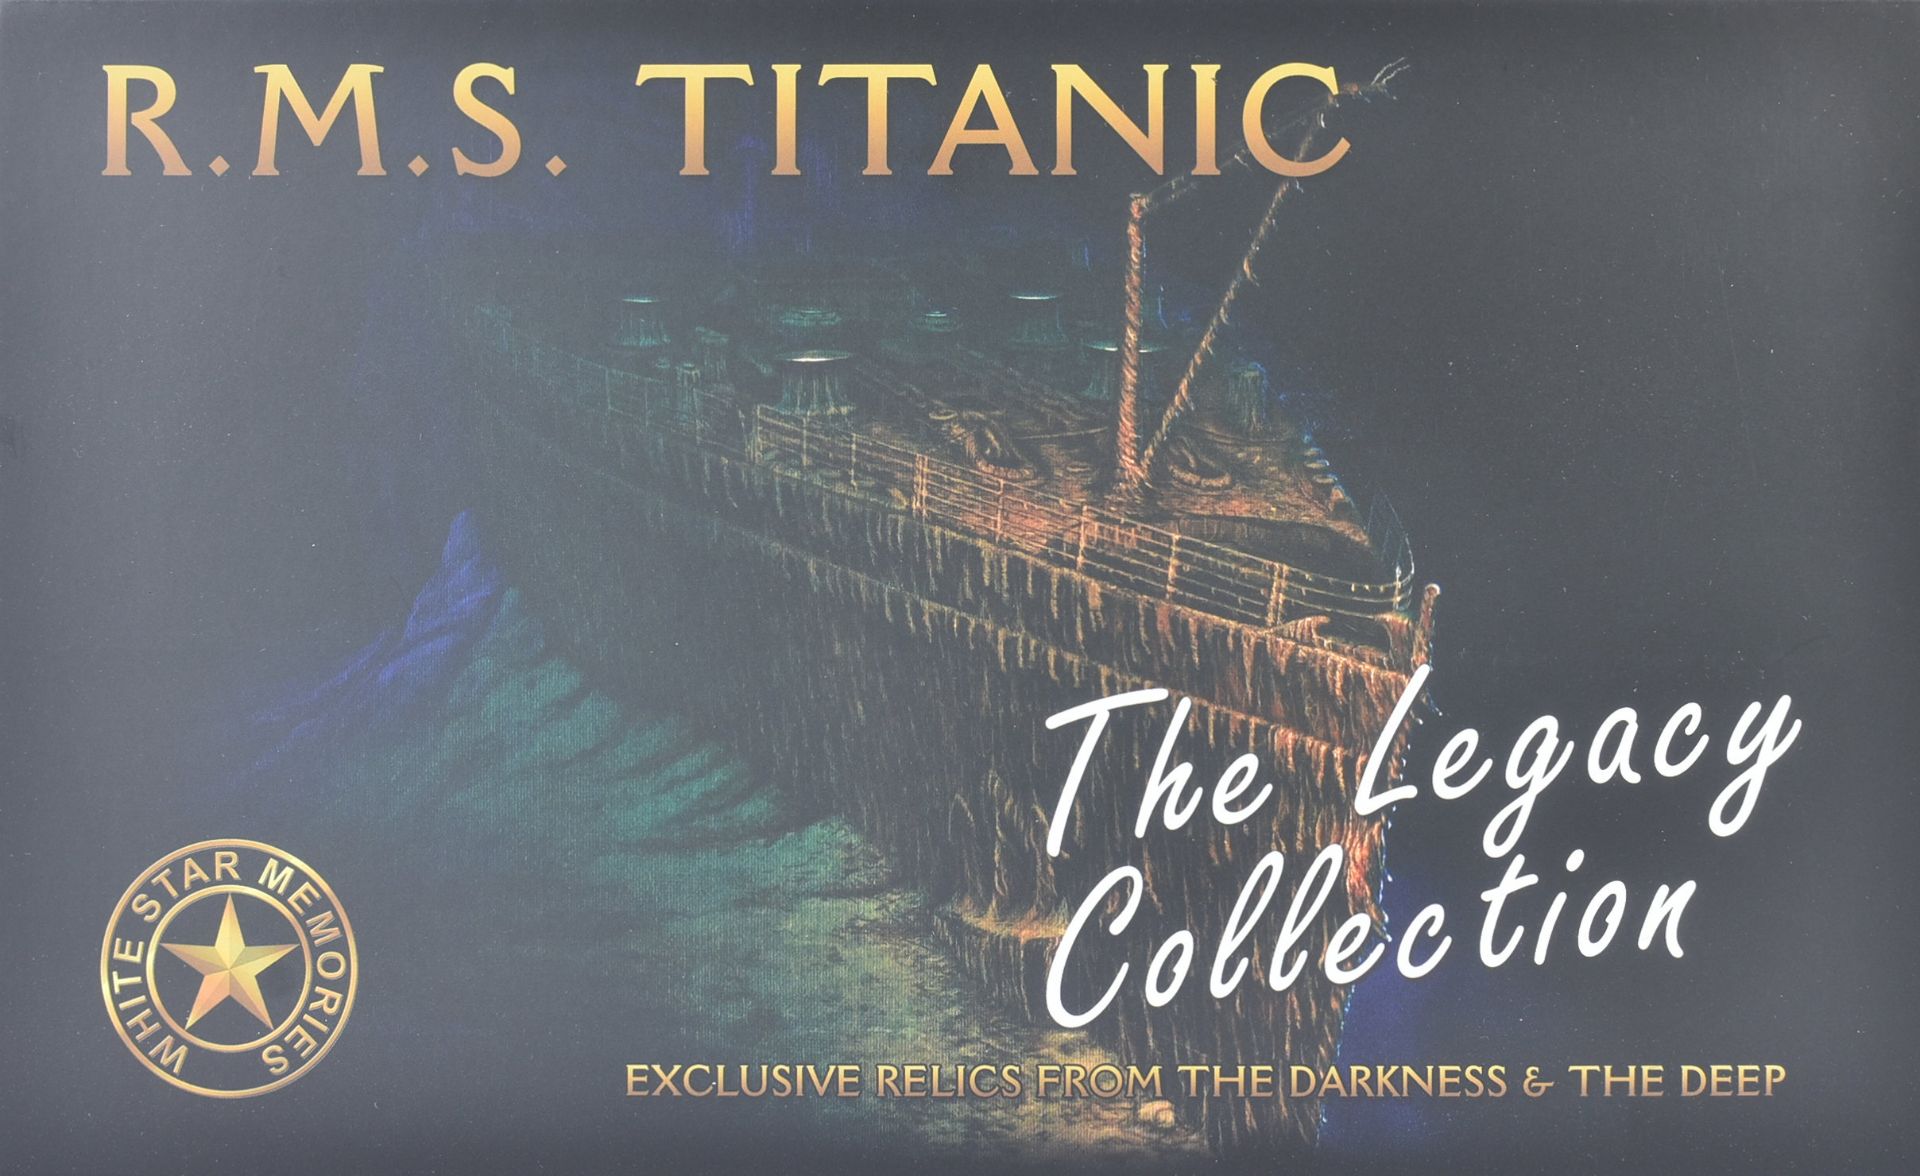 RMS TITANIC - AUTHENTIC RUSTICLE RELIC FROM THE WRECK